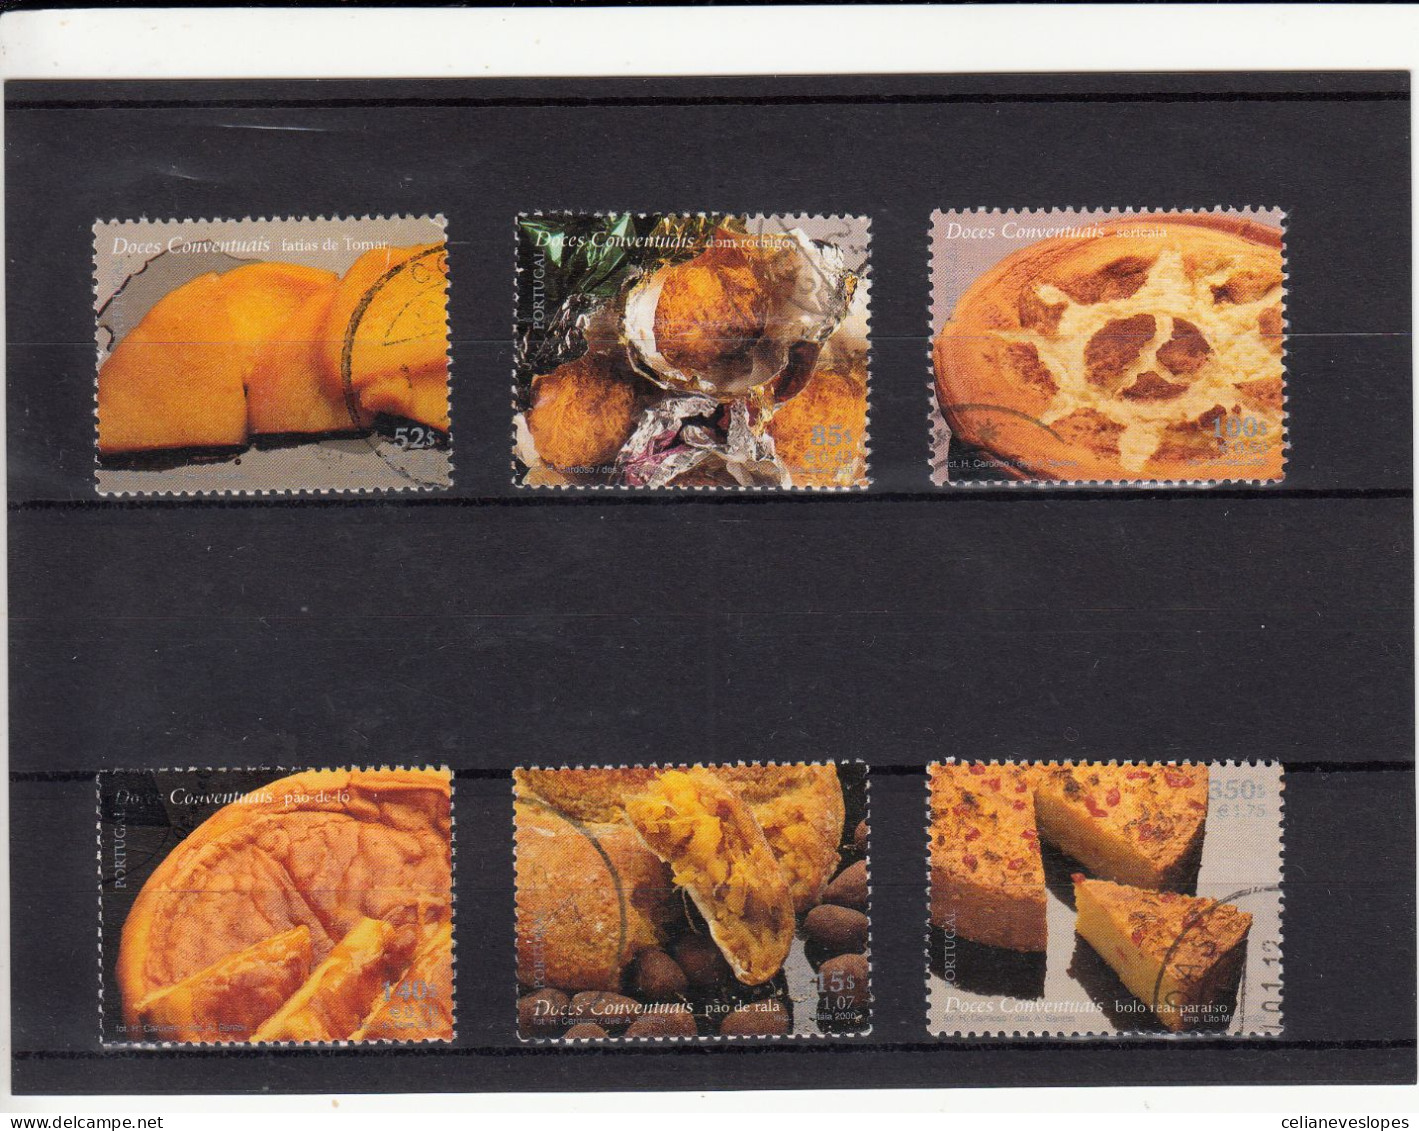 Portugal, (17), Doces Conventuais, 2000, Mundifil Nº 2695 A 2700 Used - Used Stamps